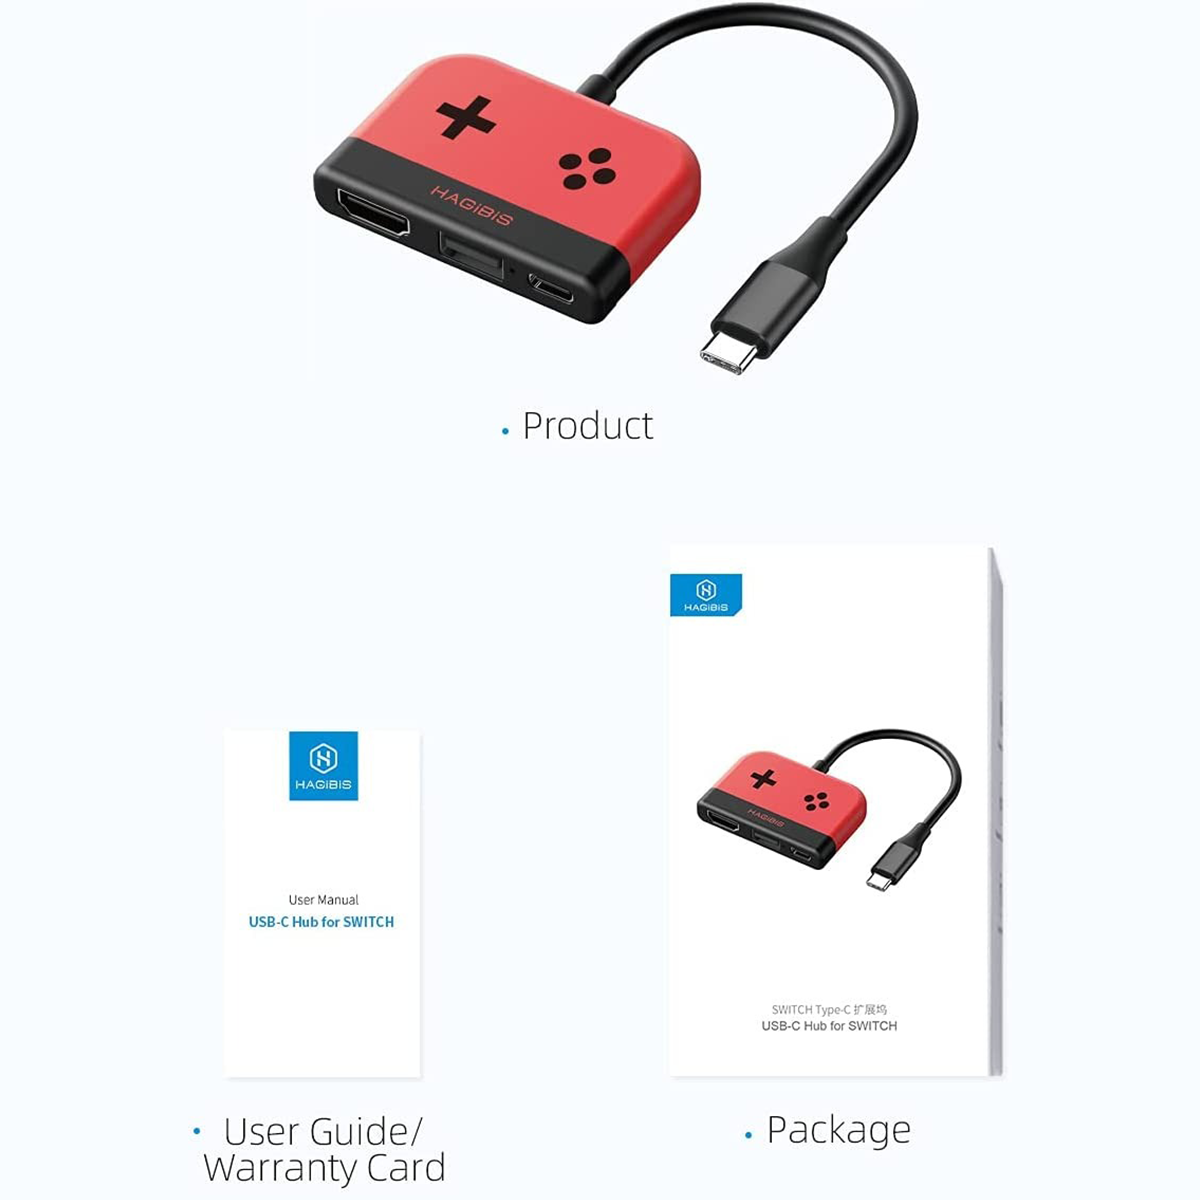 Hagibis Switch Dock for Nintendo Switch Portable TV Dock Charging Docking Station Charger 4K HDMI-compatible TV Adapter USB 3.0 Red